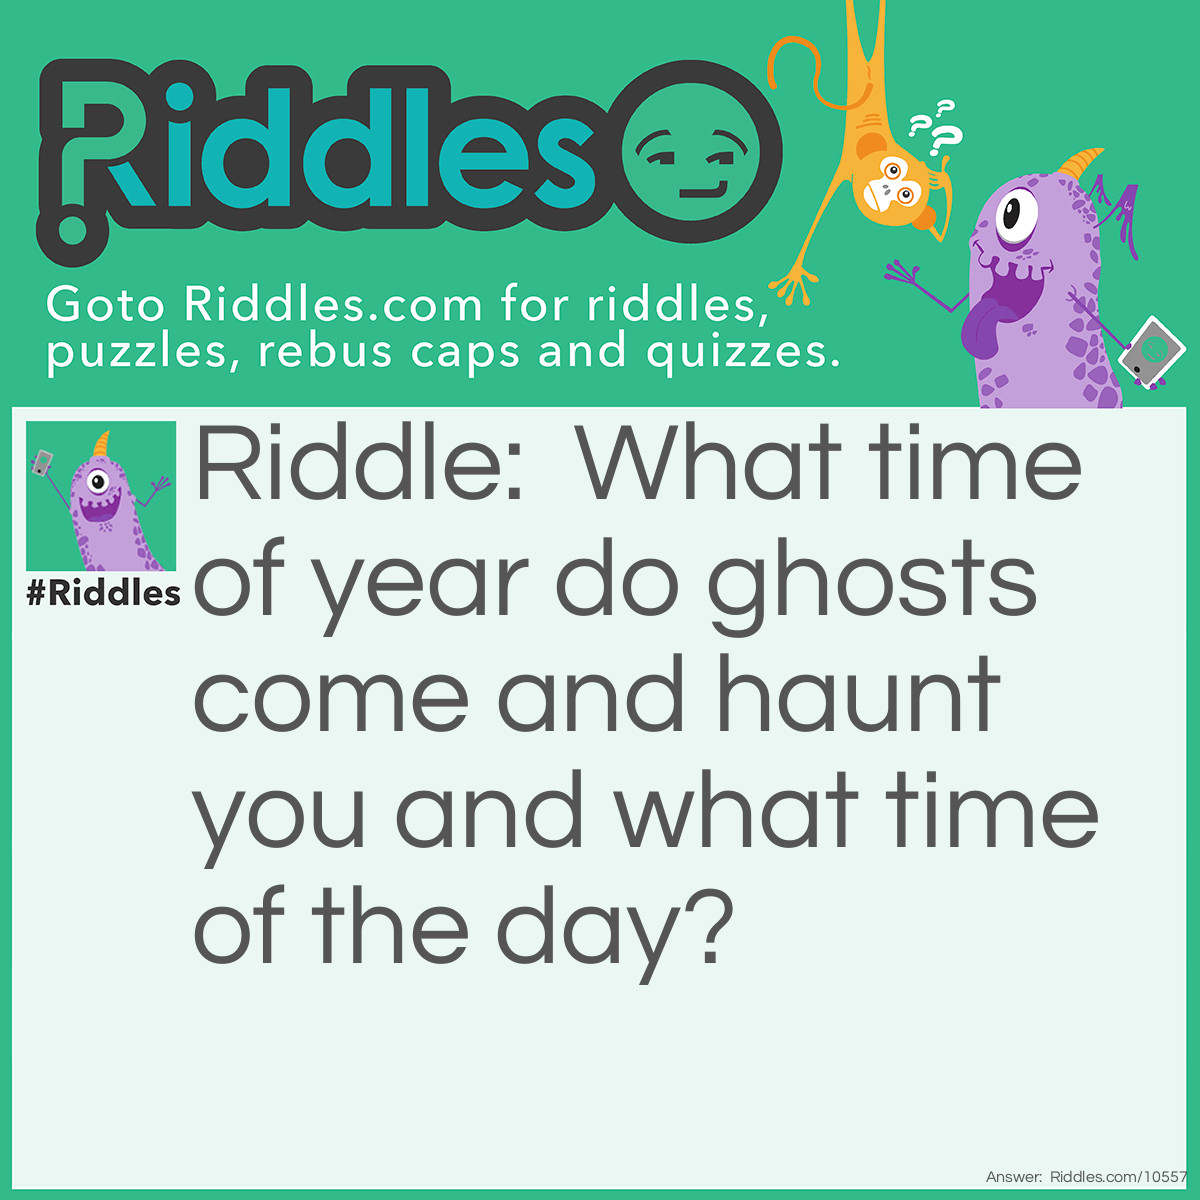 Riddle: What time of year do ghosts come and haunt you and what time of the day? Answer: Halloween 12:00 when your sleeping.